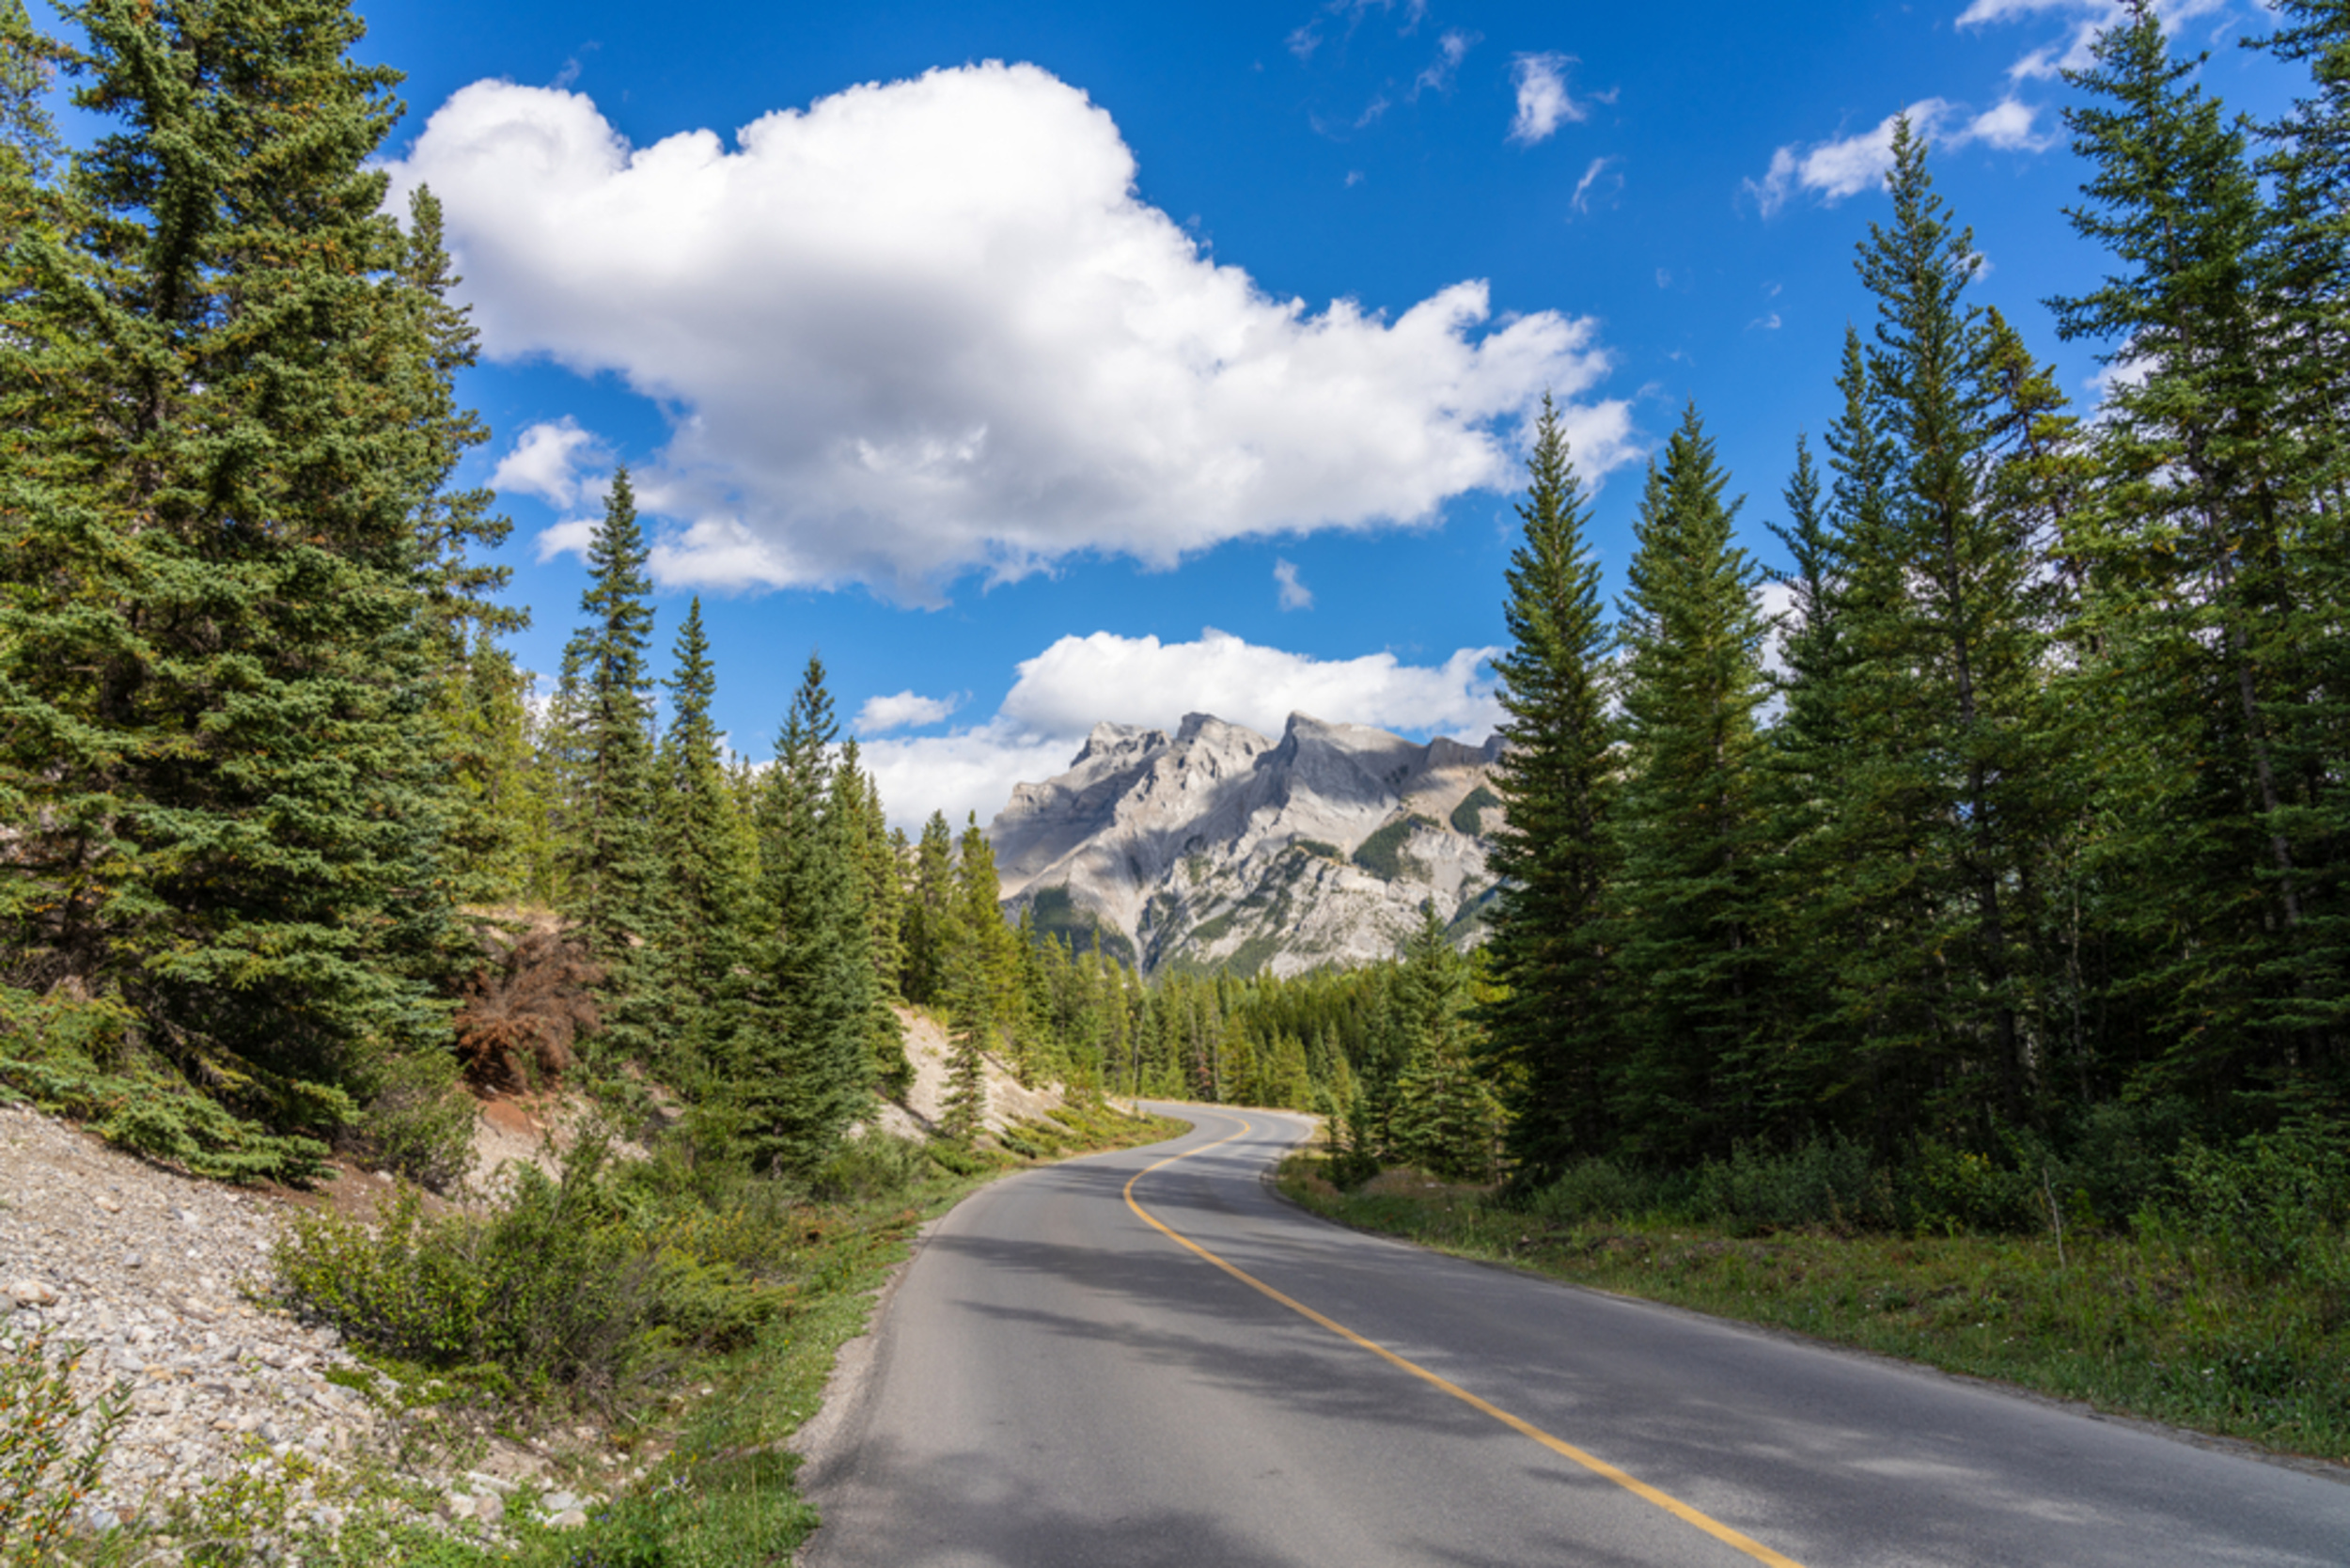 <p>The United States is absolutely replete with gorgeous scenic byways and hidden gem highways offering some truly stunning views. Search for scenic byways along your route, and consider taking a detour to take in some natural beauty before making it to your destination. </p><p>You may also like: <a href='https://www.yardbarker.com/lifestyle/articles/25_gameday_snacks_you_can_make_in_a_slow_cooker_013124/s1__22916233'>25 gameday snacks you can make in a slow cooker</a></p>